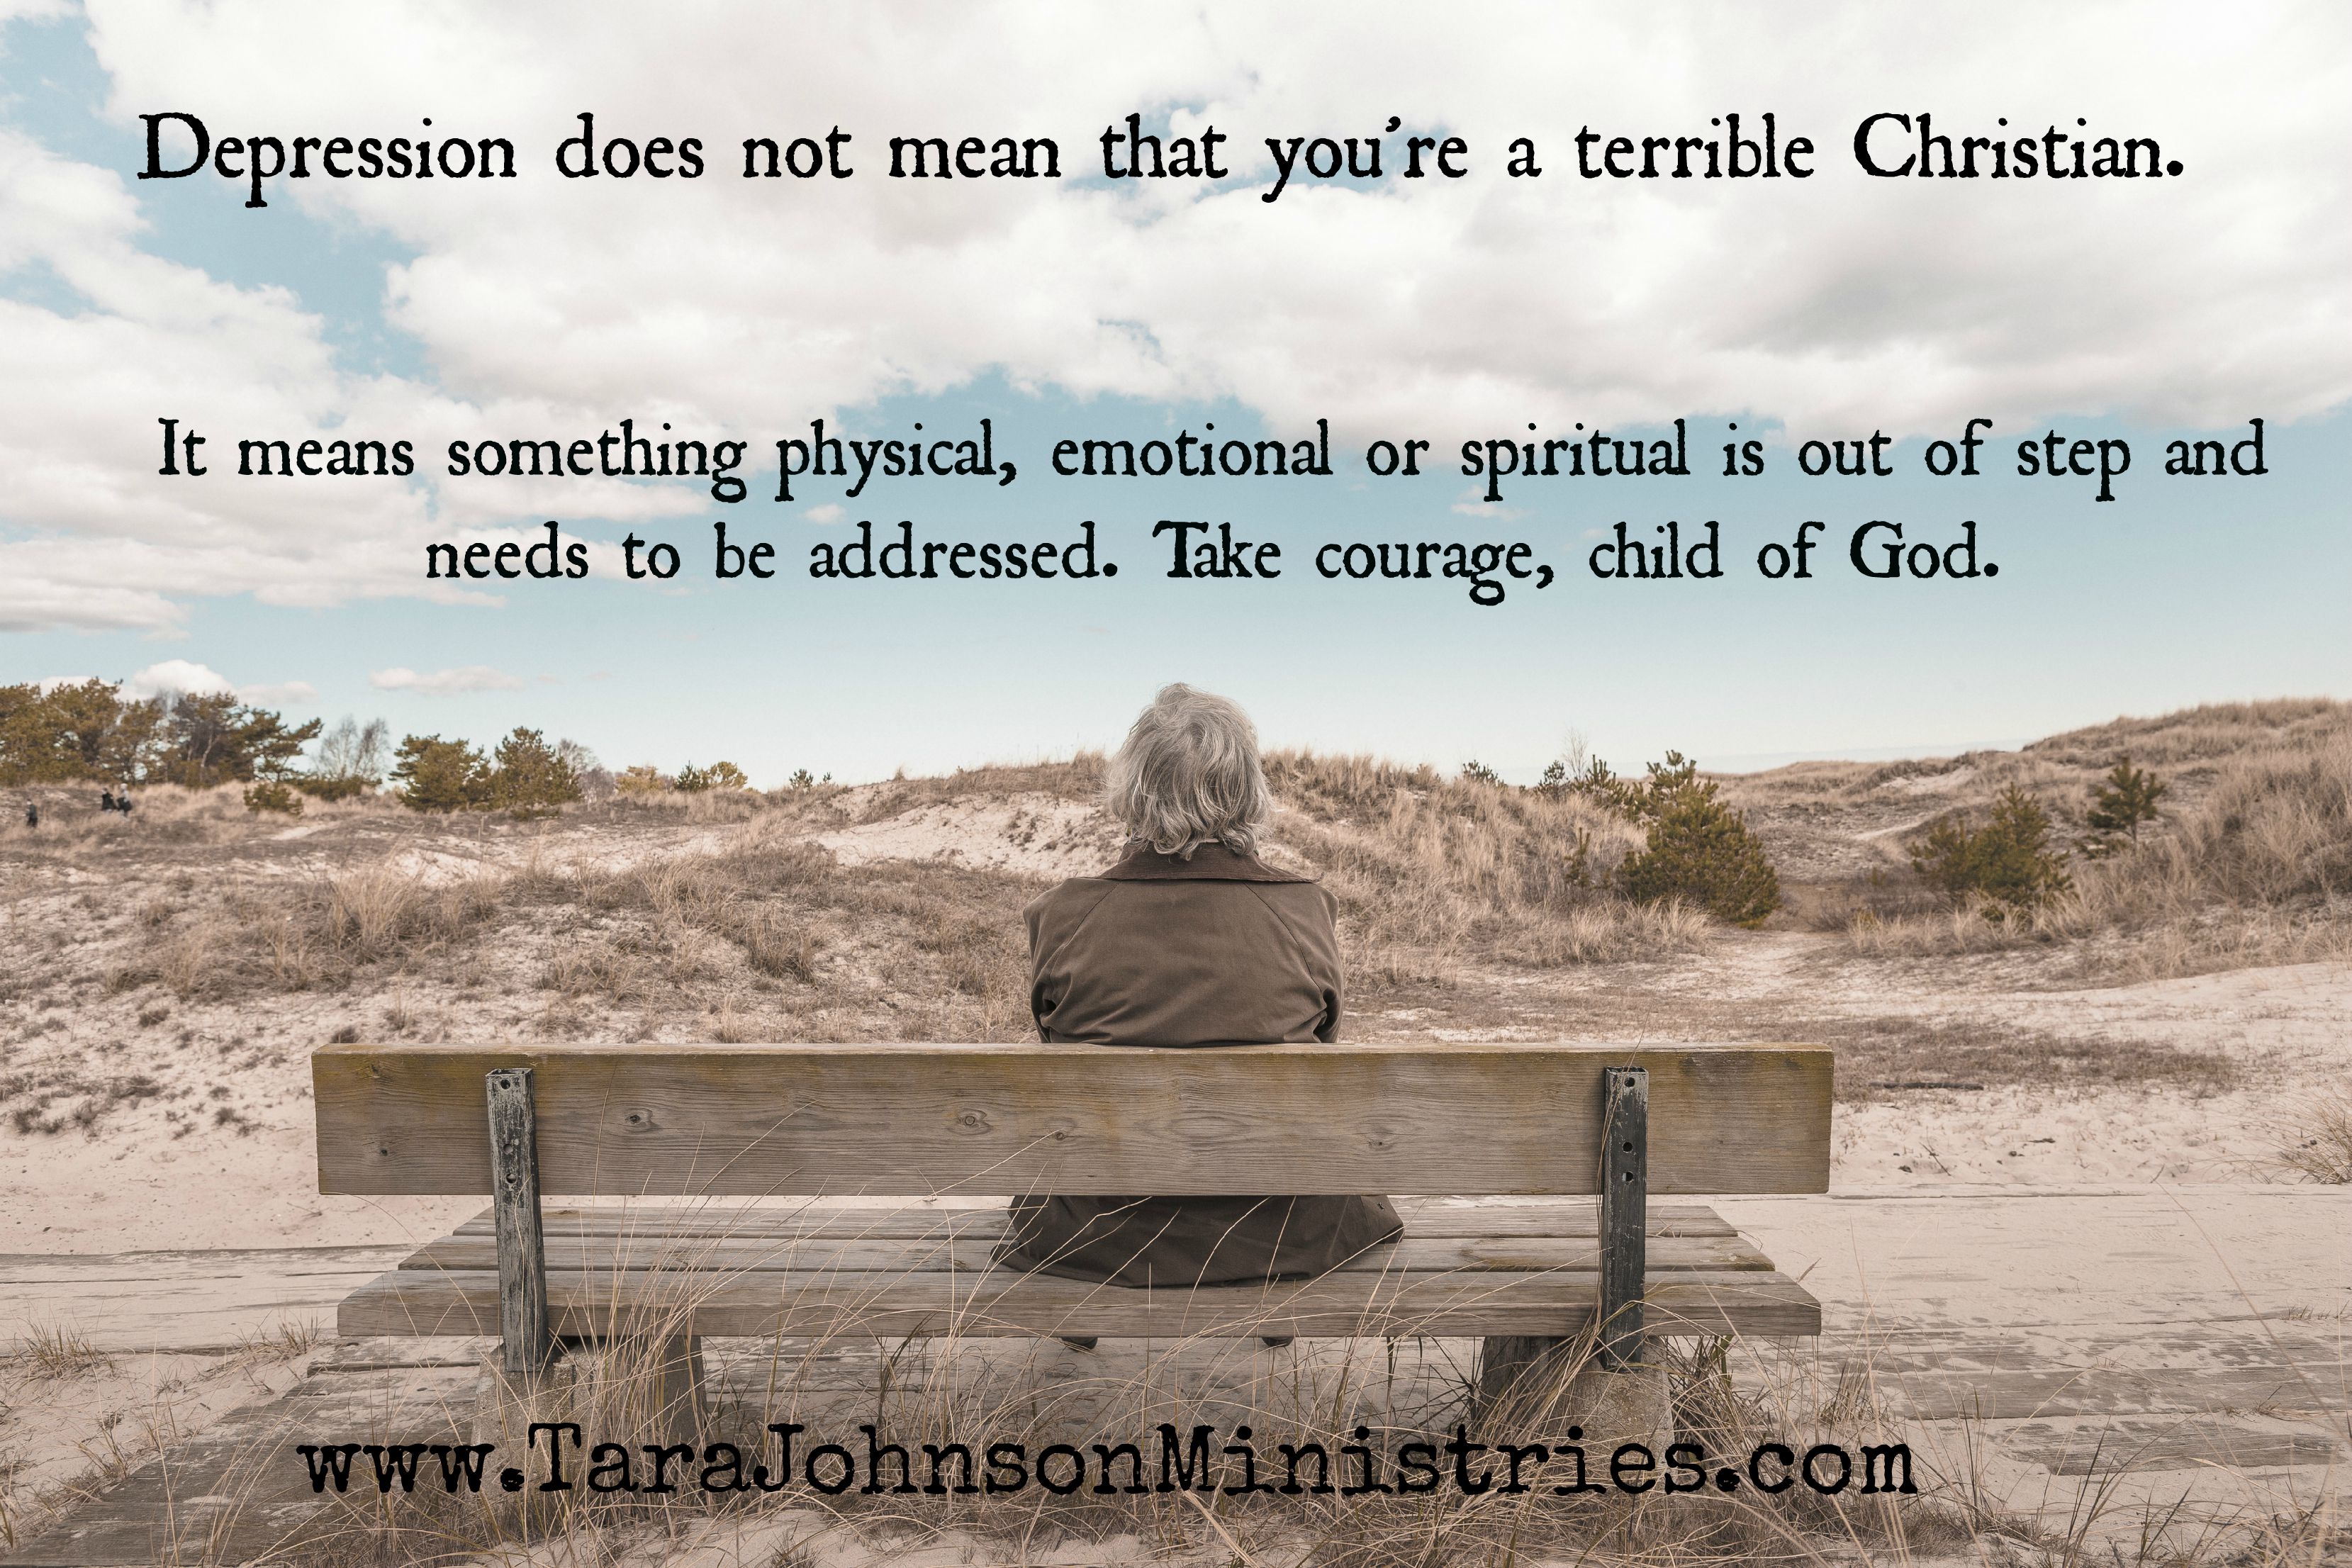 depression not a terrible christian